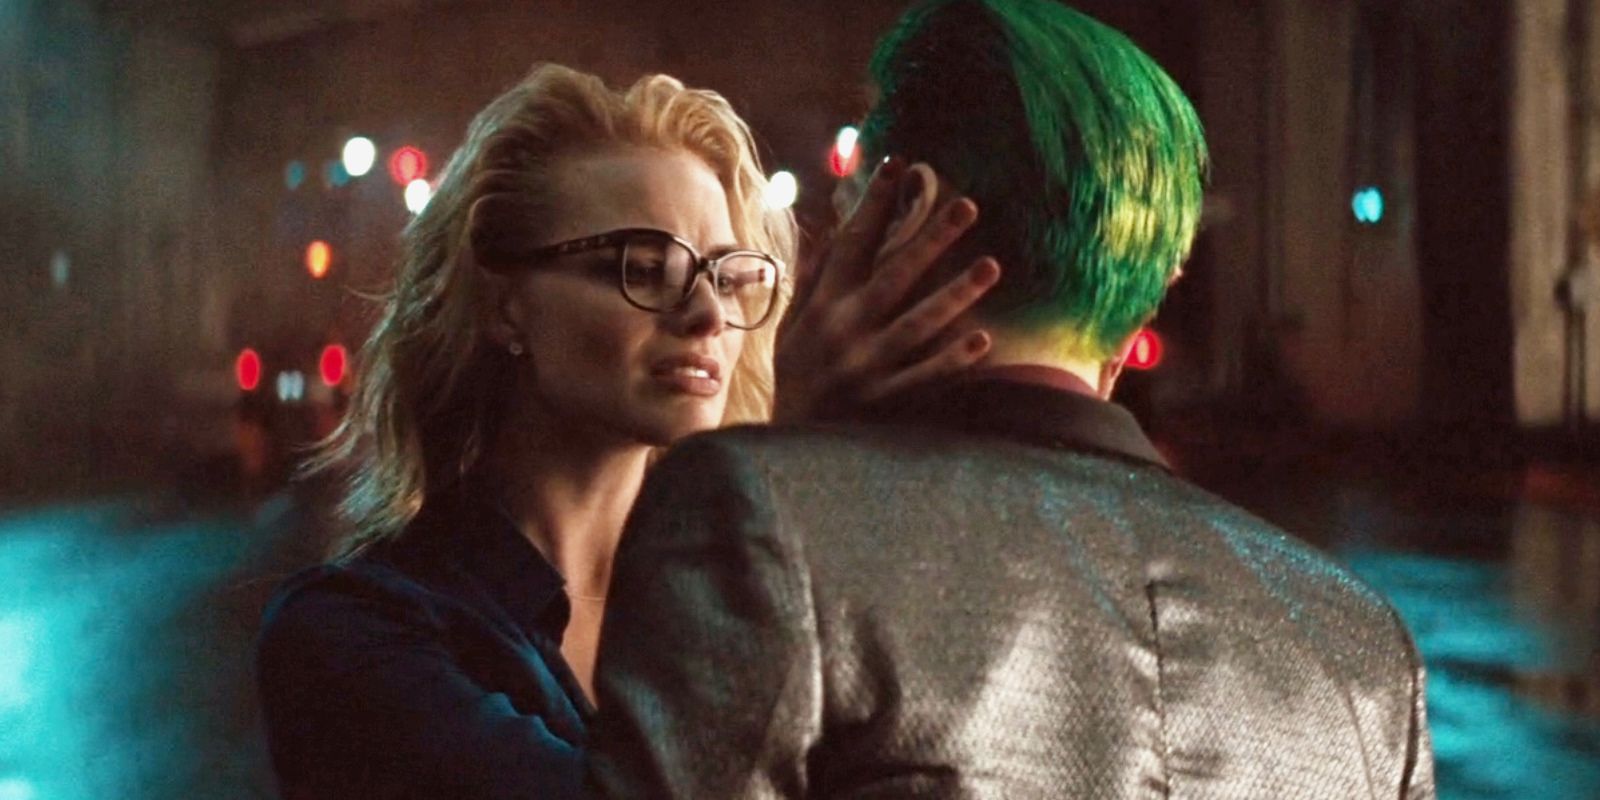 7. The Joker's blonde hair in the film "Suicide Squad" - wide 4